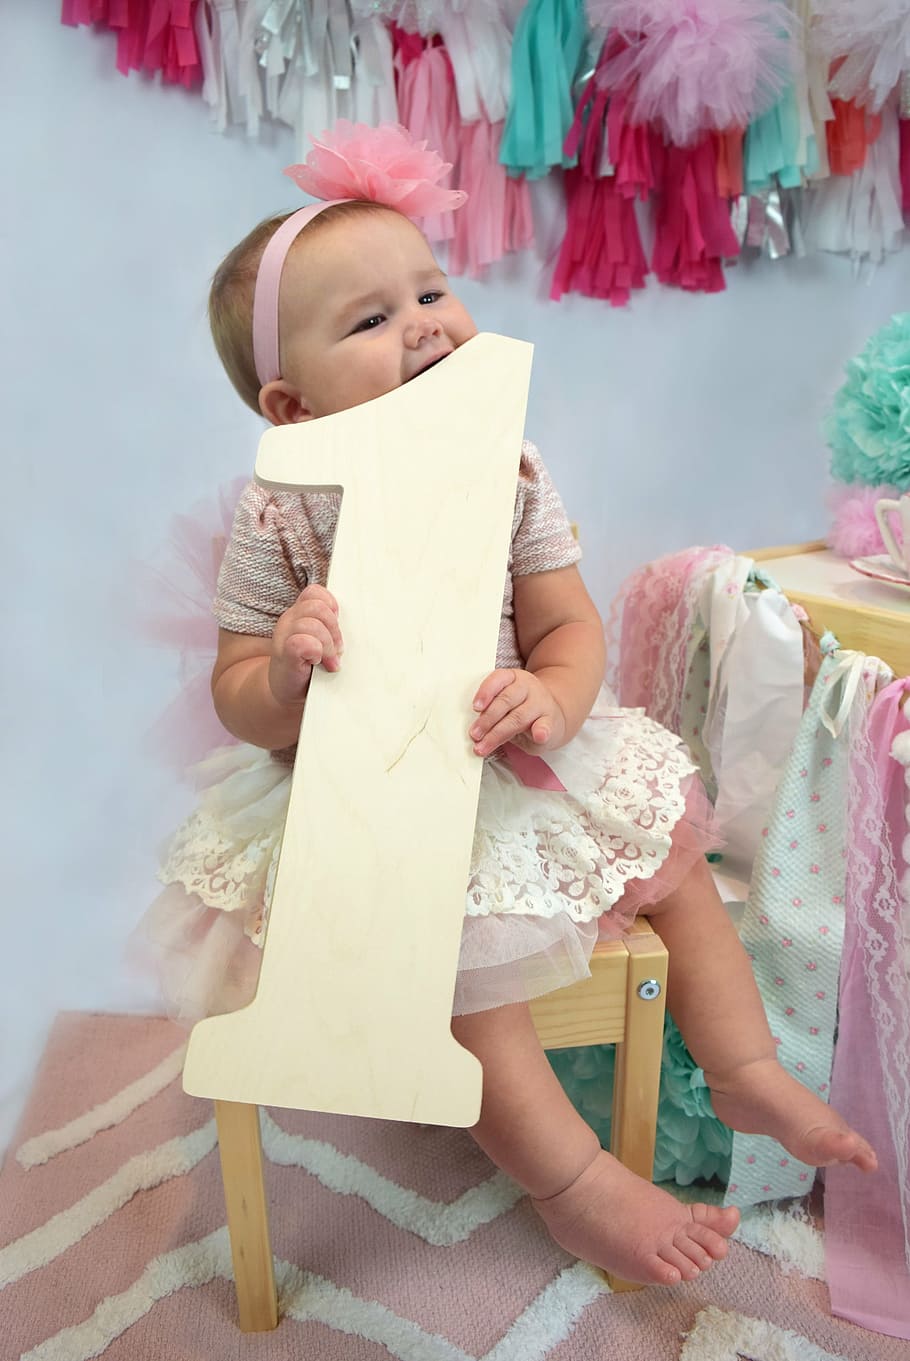 girl holding letter 1 standee while sitting on stool, one year old